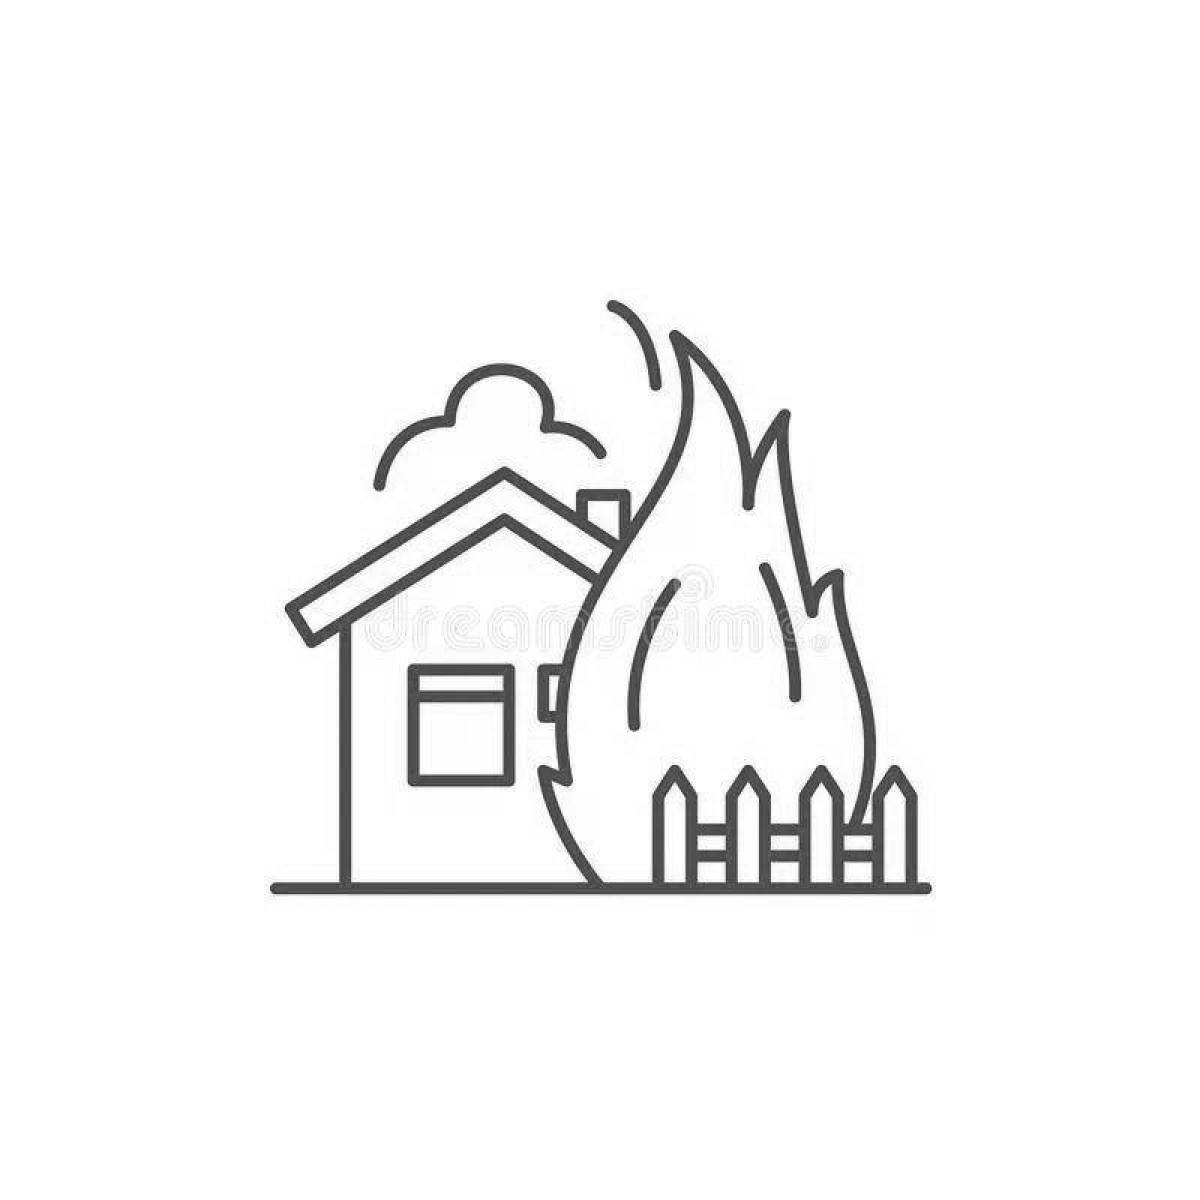 Coloring book smoldering burning house